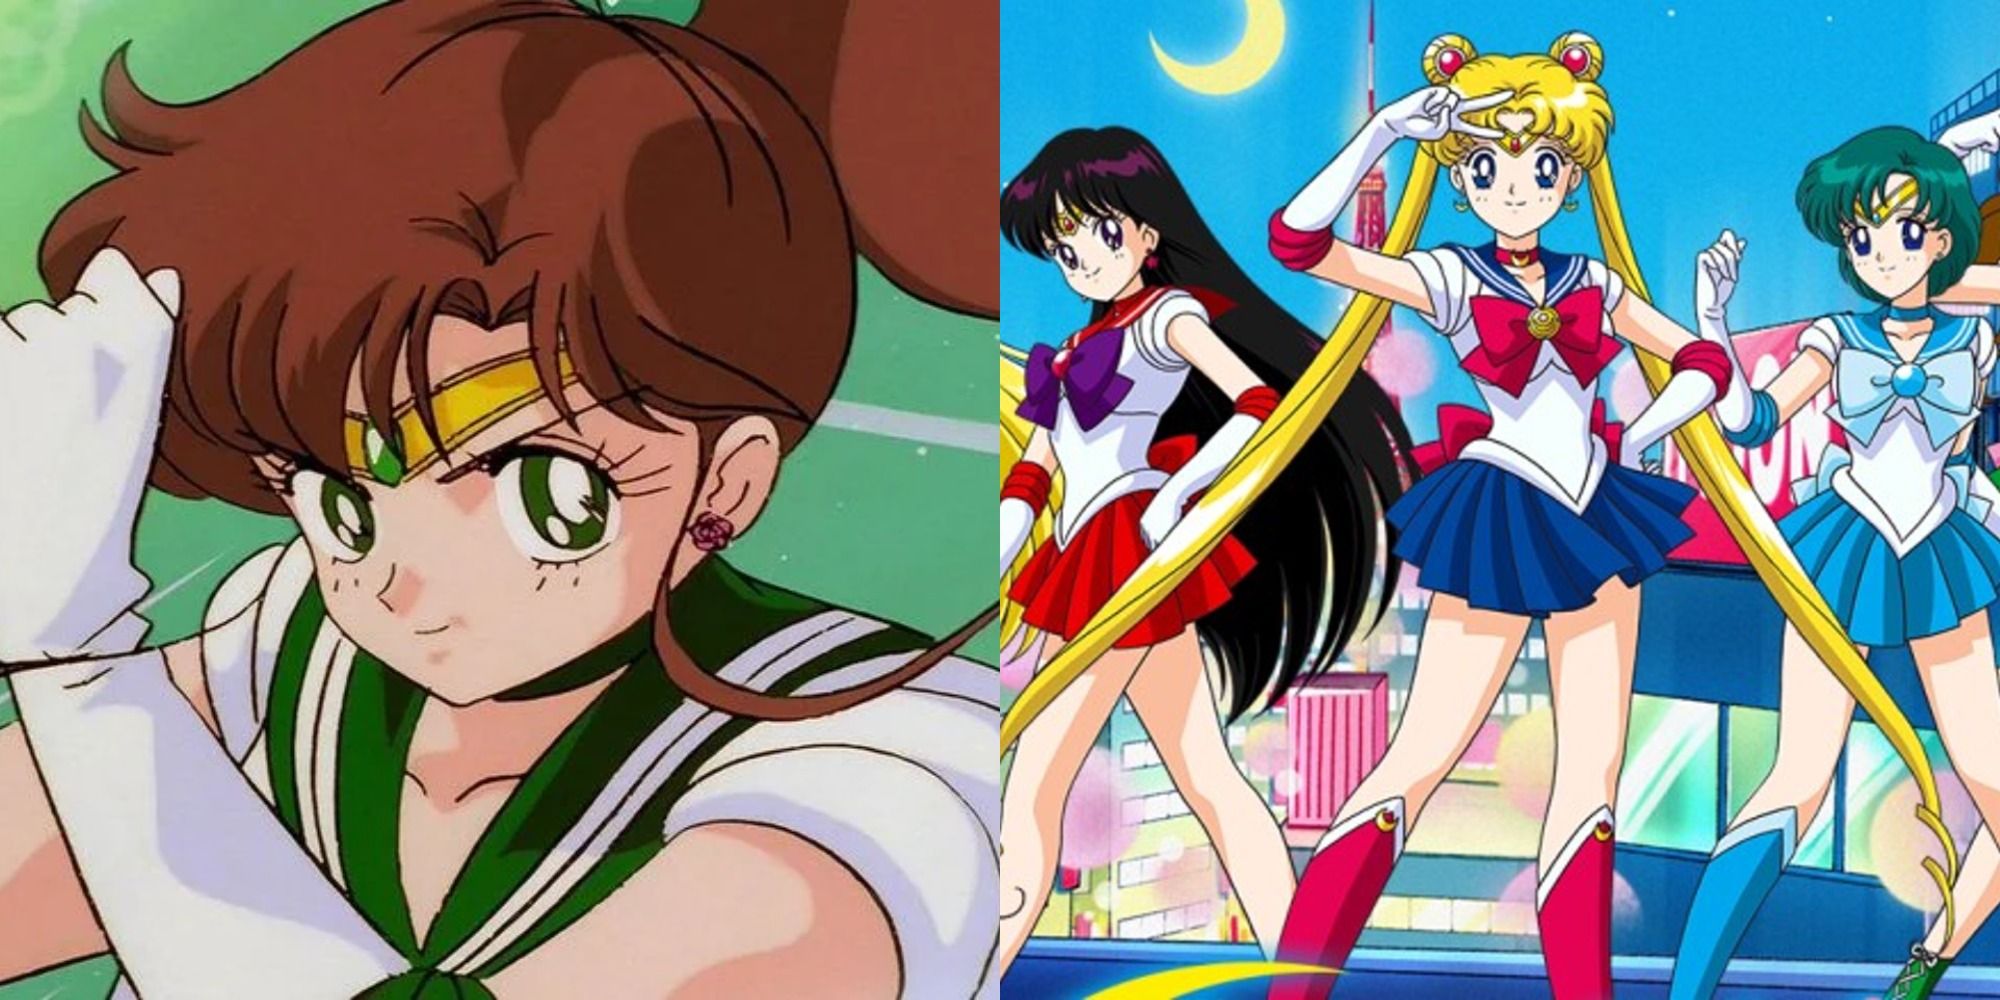 Top 10 Sailor Moon Characters According to My Anime List